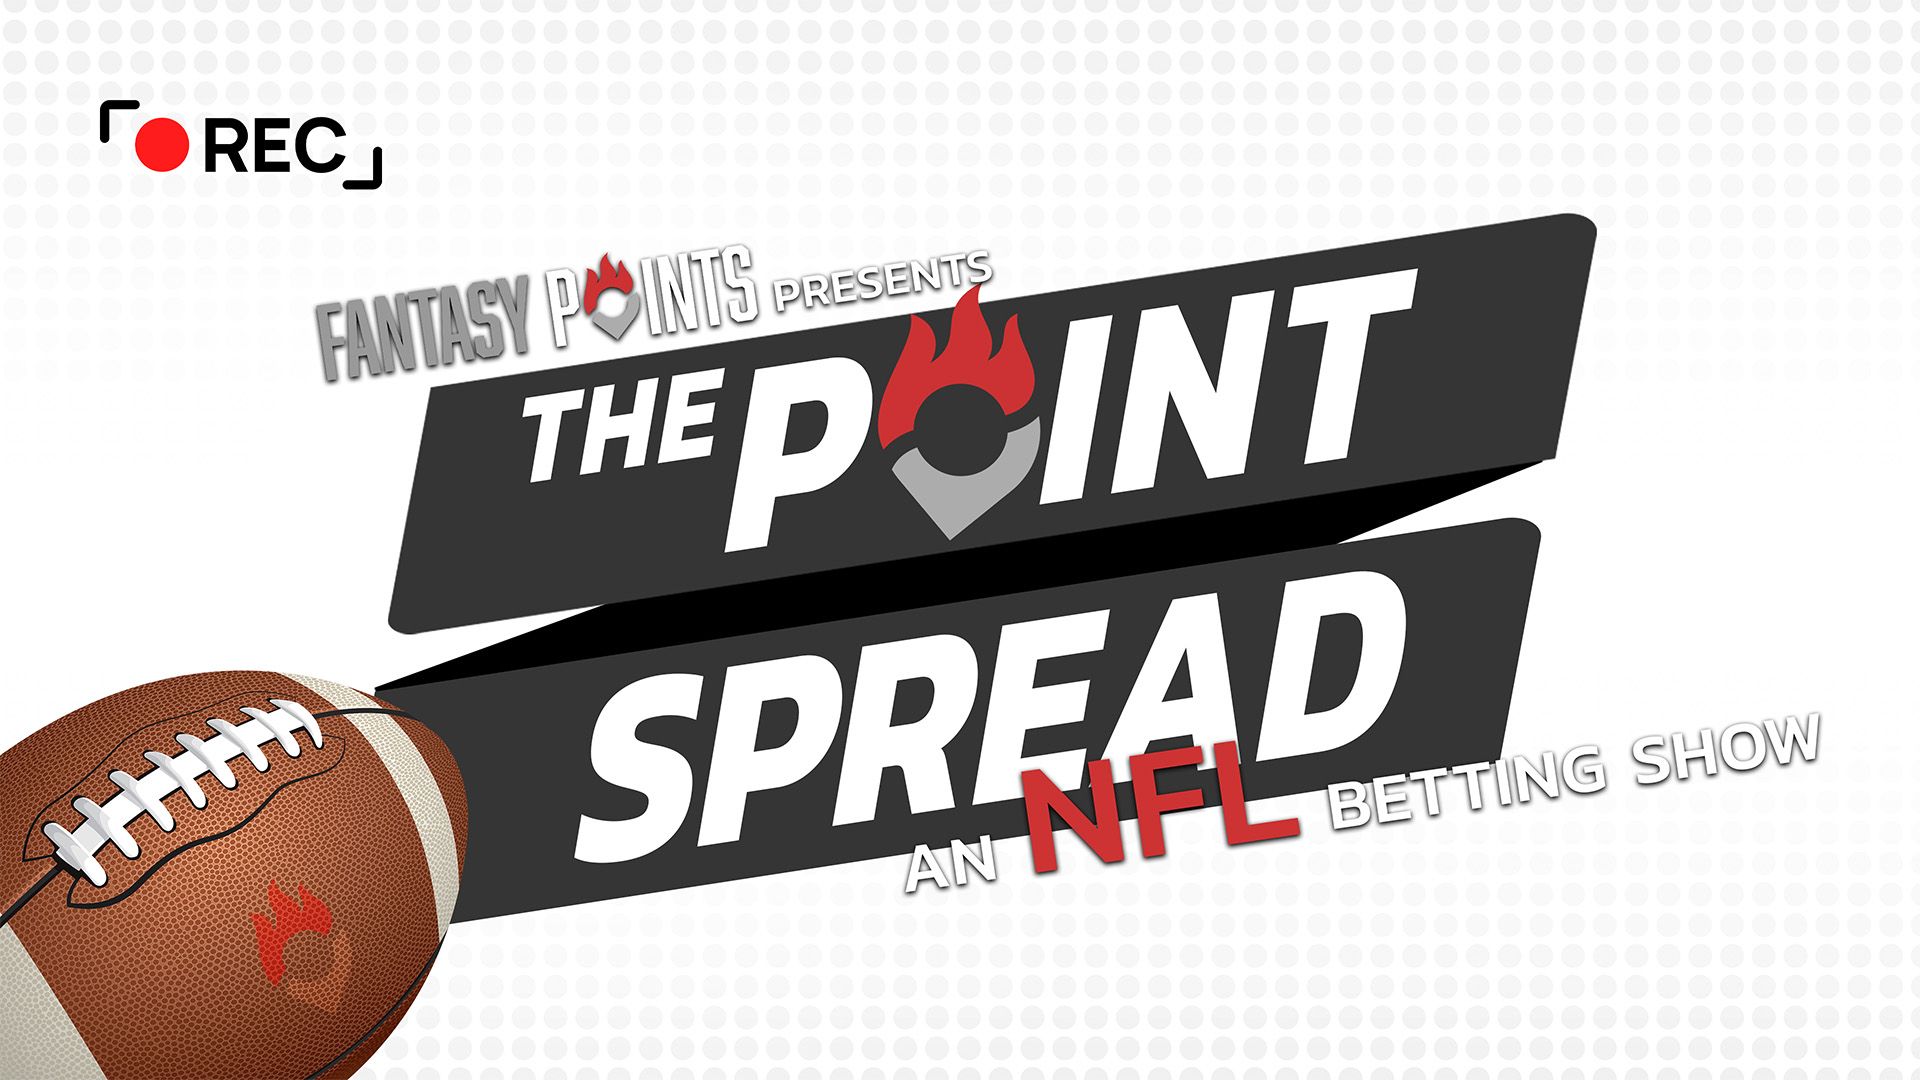 point spread for week 14 nfl